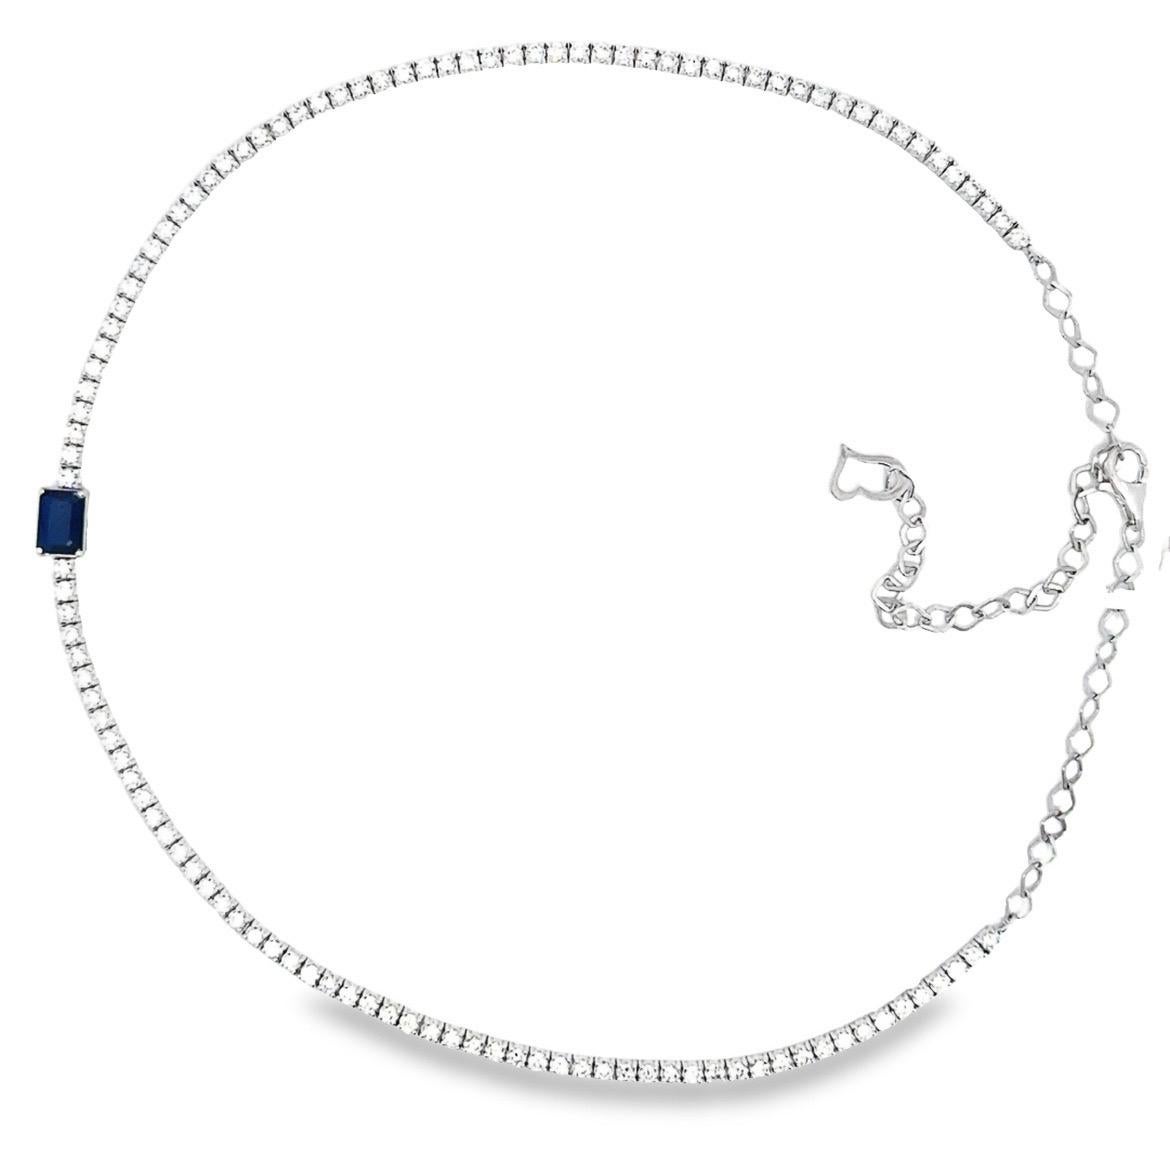 Women's or Men's Diamond Choker Necklace in 14k white with 1.02ct of Natural Emerald Cut Sapphire For Sale